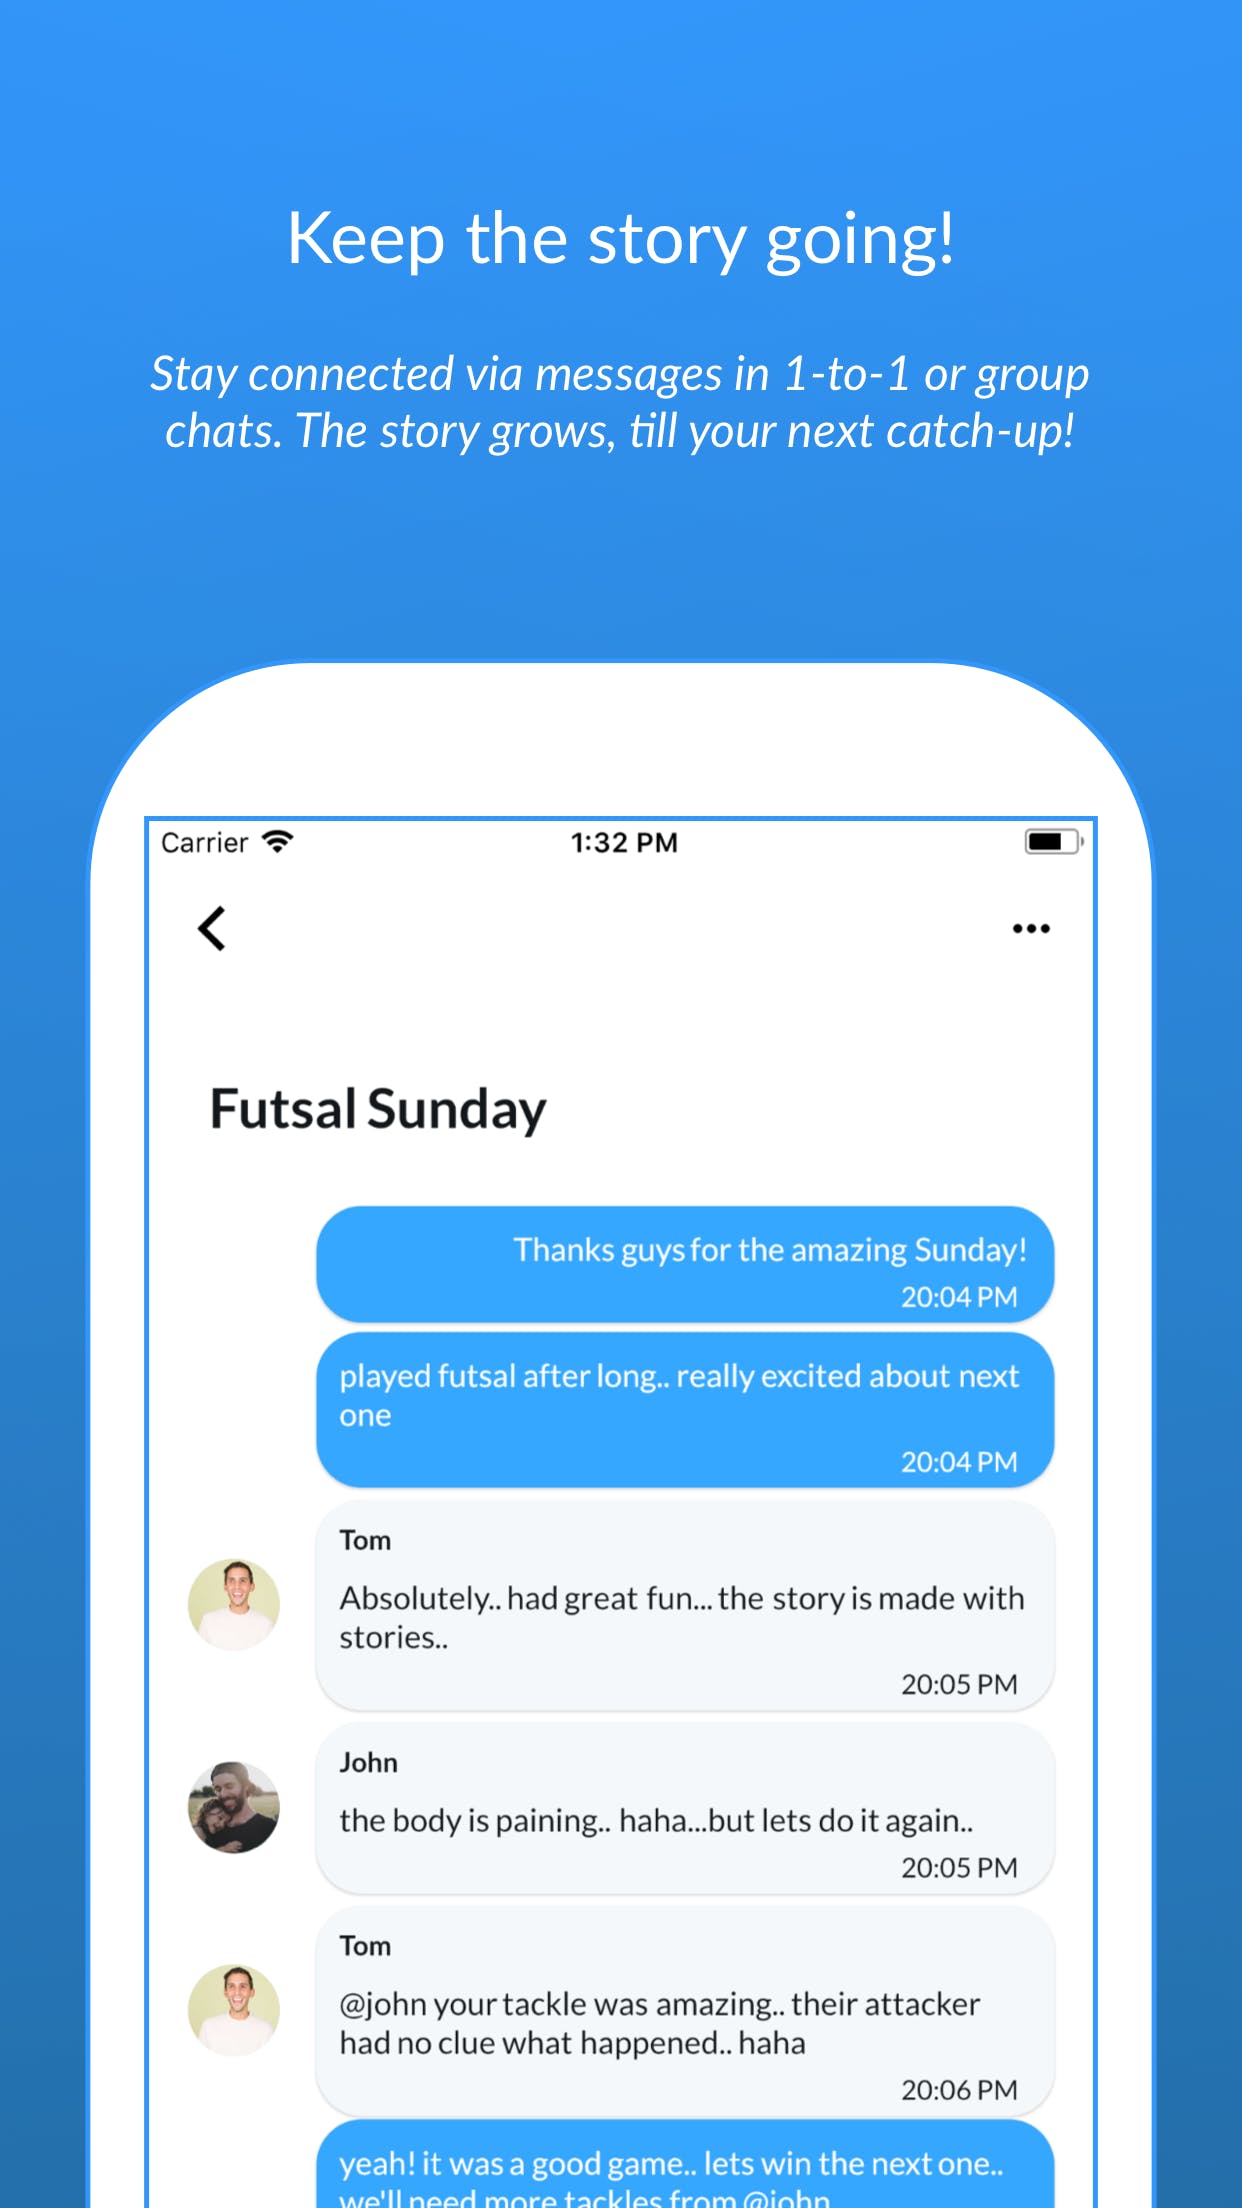 Stories : plan your catch-ups to share stories media 2